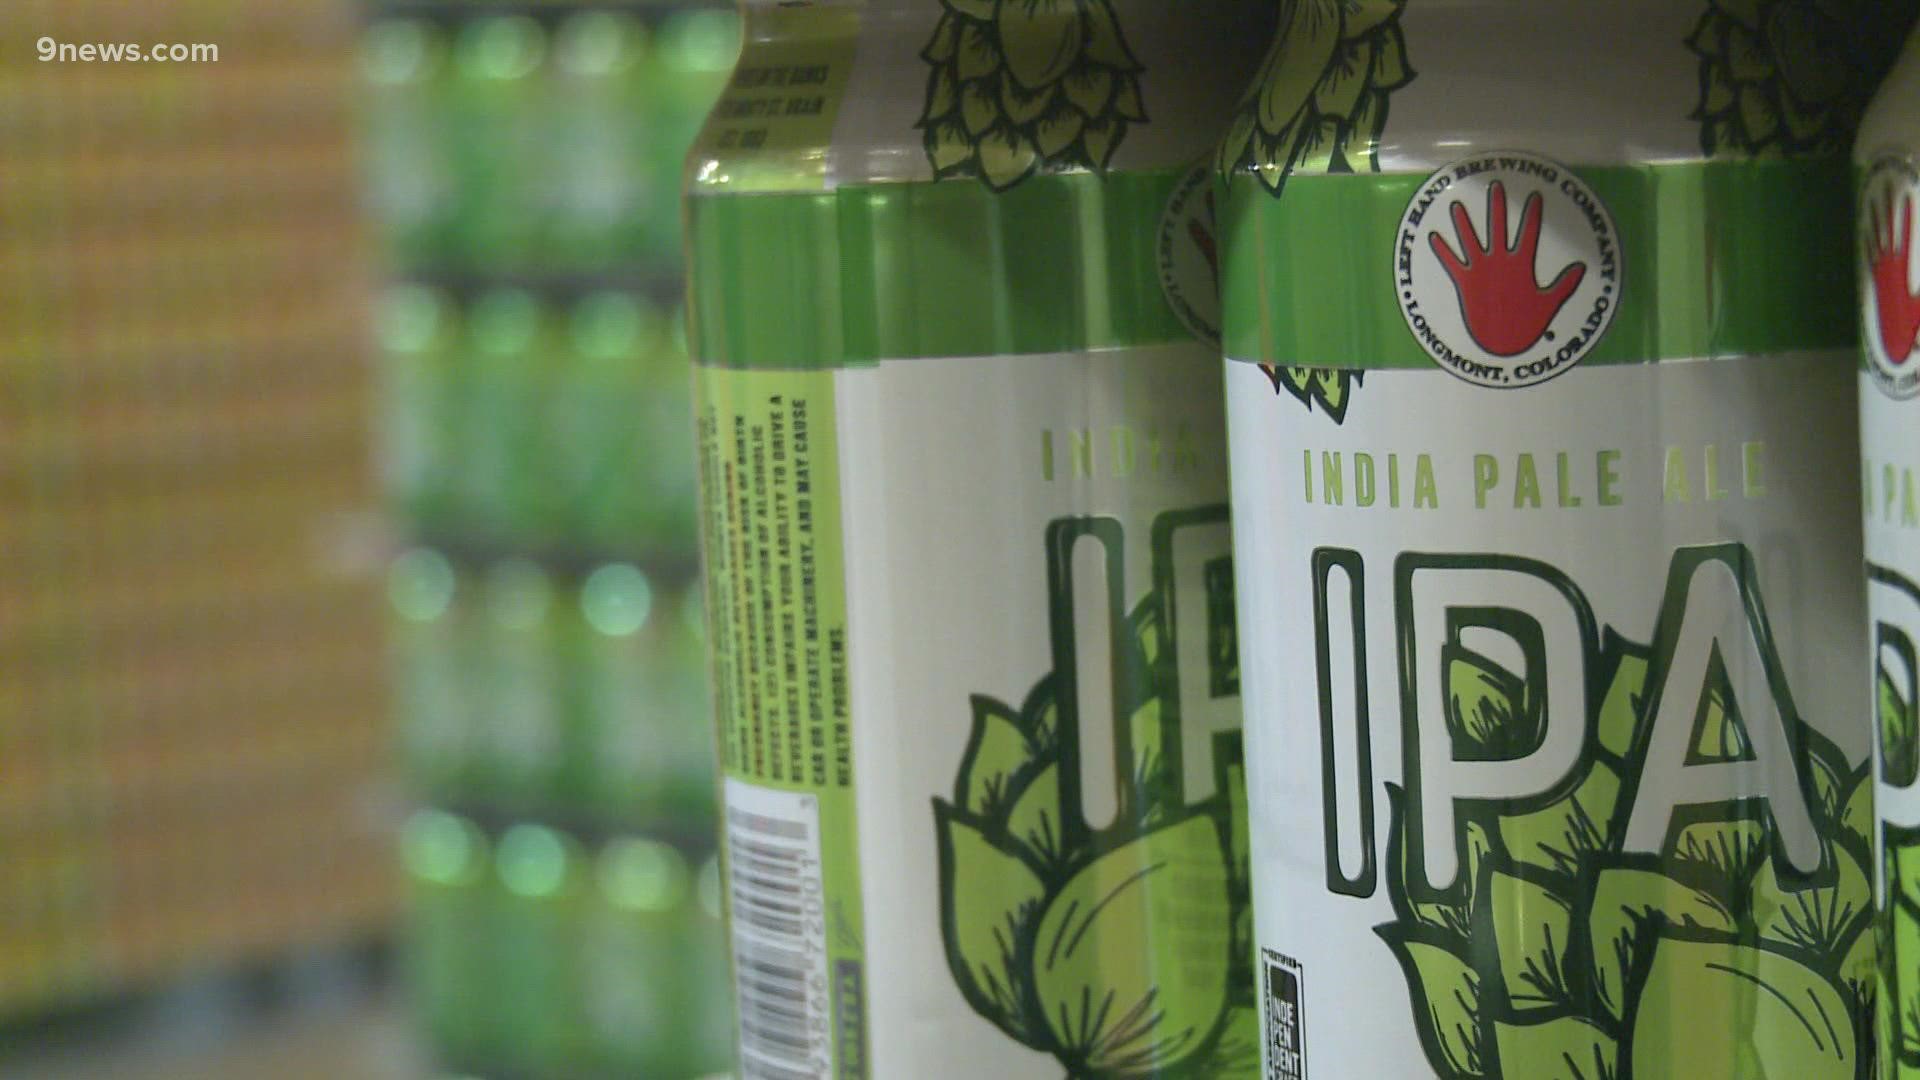 Colorado-based Ball Aluminum is making some changes to procedures, requiring breweries to buy 1 million cans at once if they don't have a contract with the company.